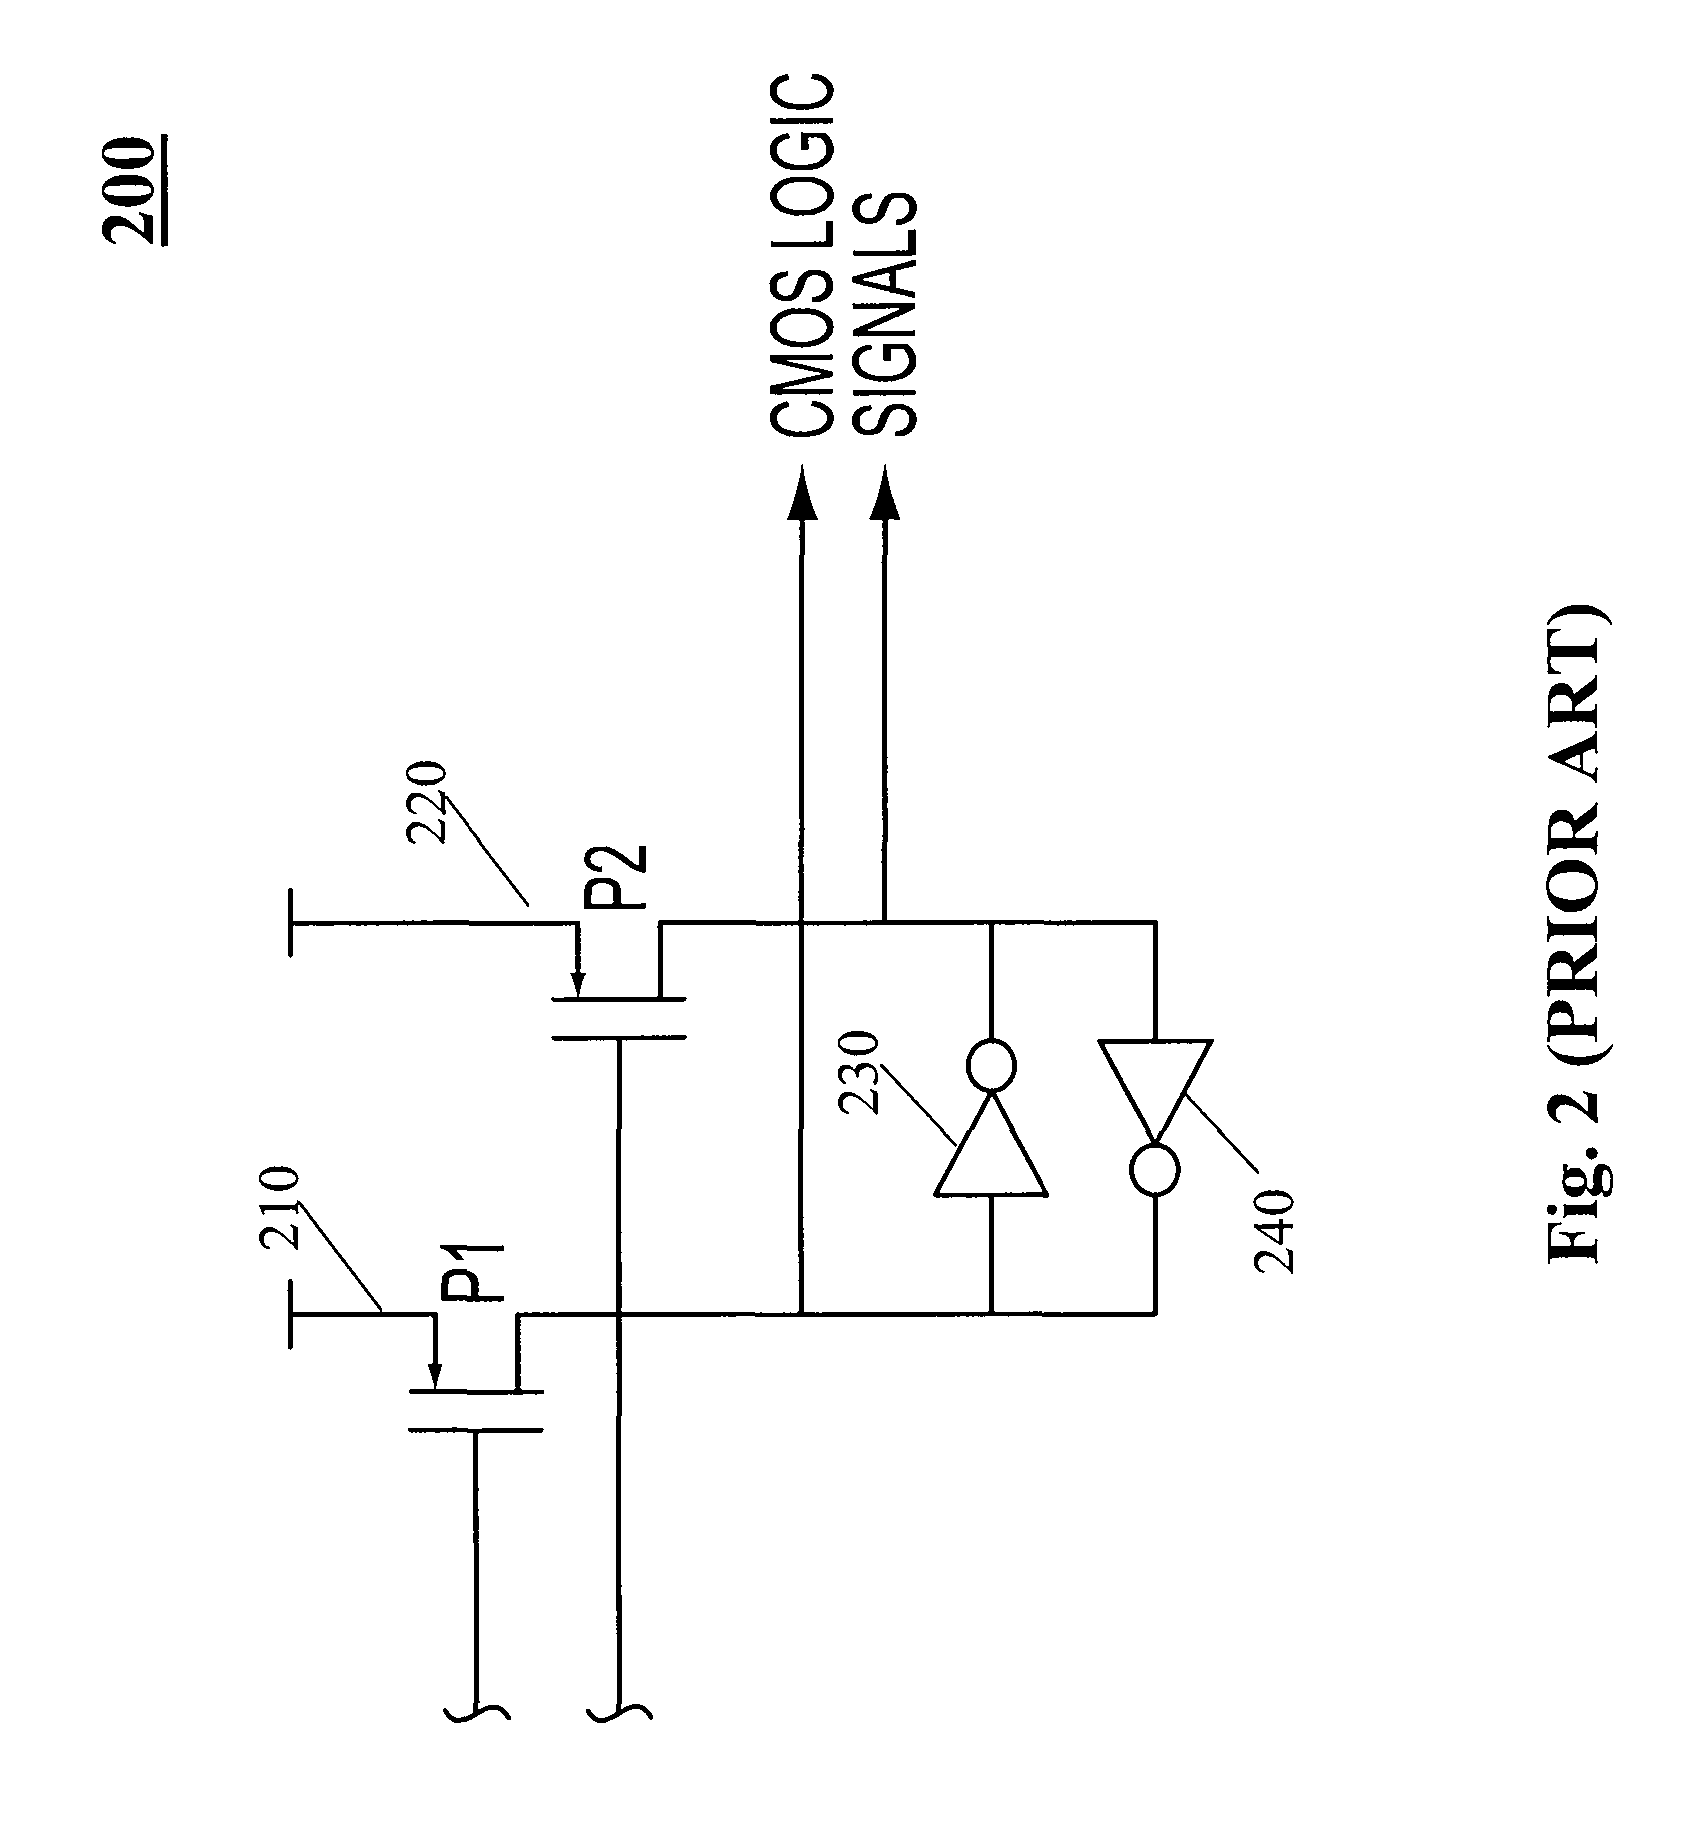 Method and system for improved phase noise in a BiCMOS clock driver